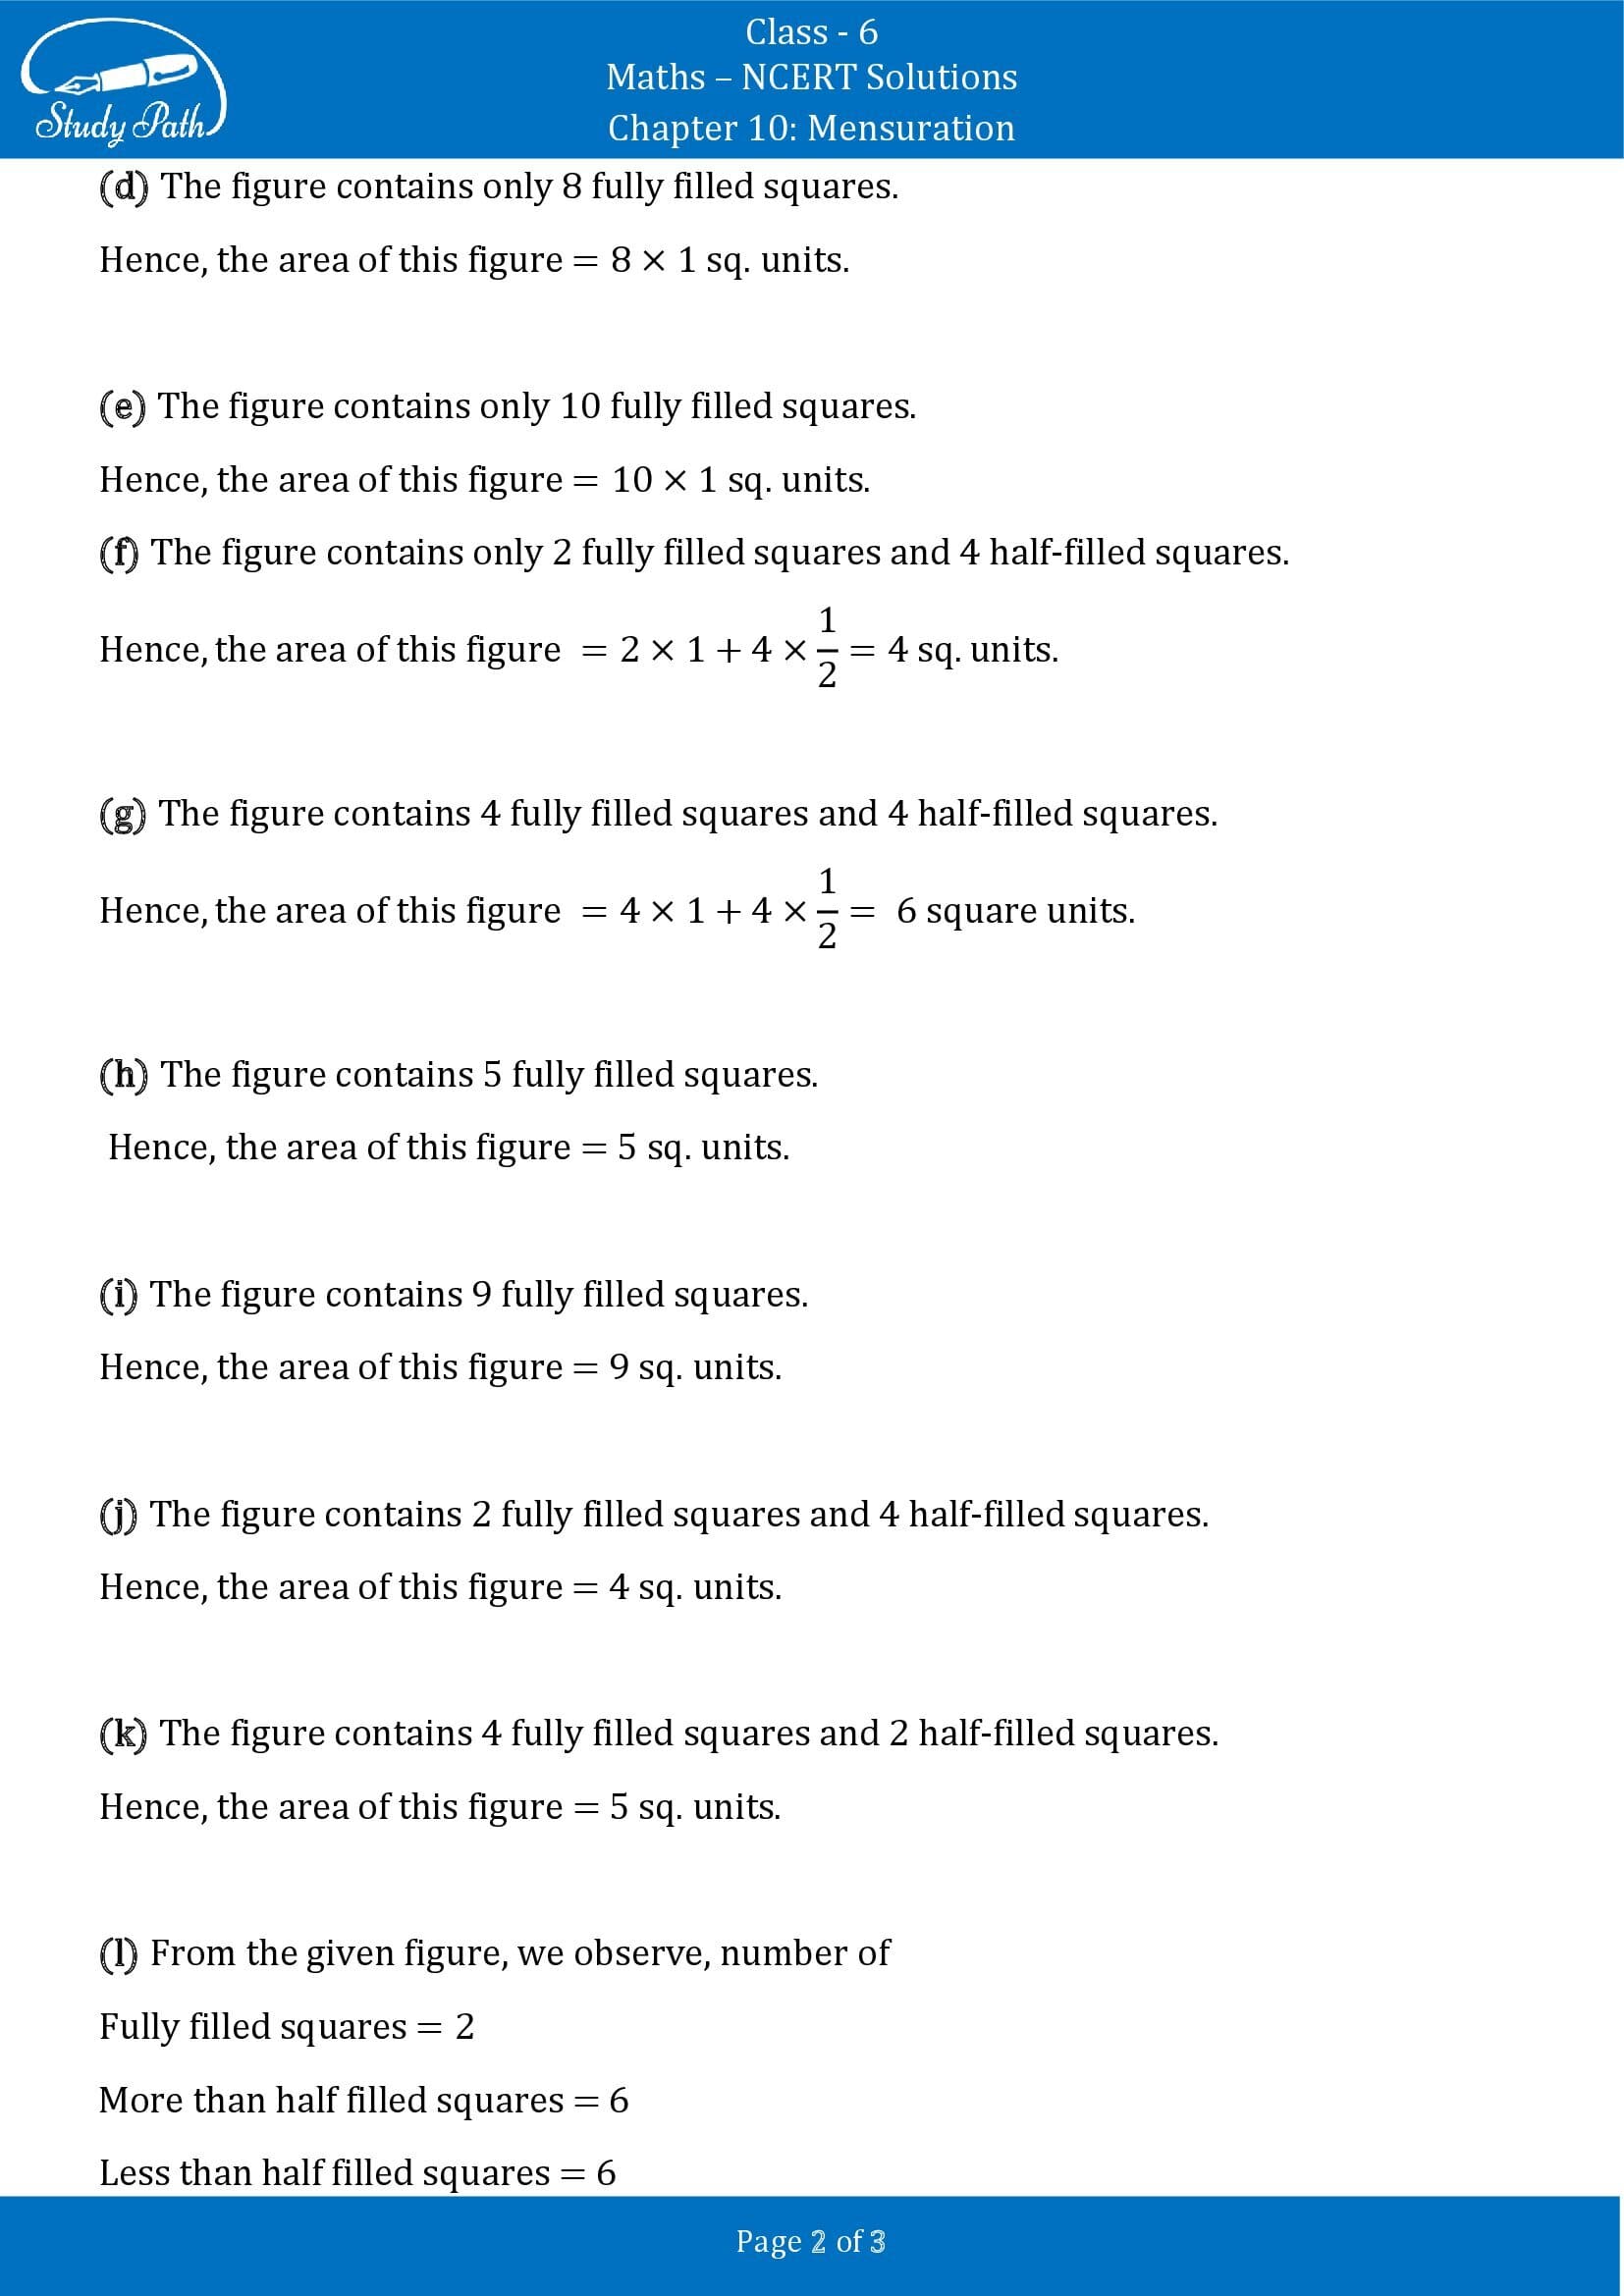 NCERT Solutions for Class 6 Maths Chapter 10 Mensuration Exercise 10.2 00002